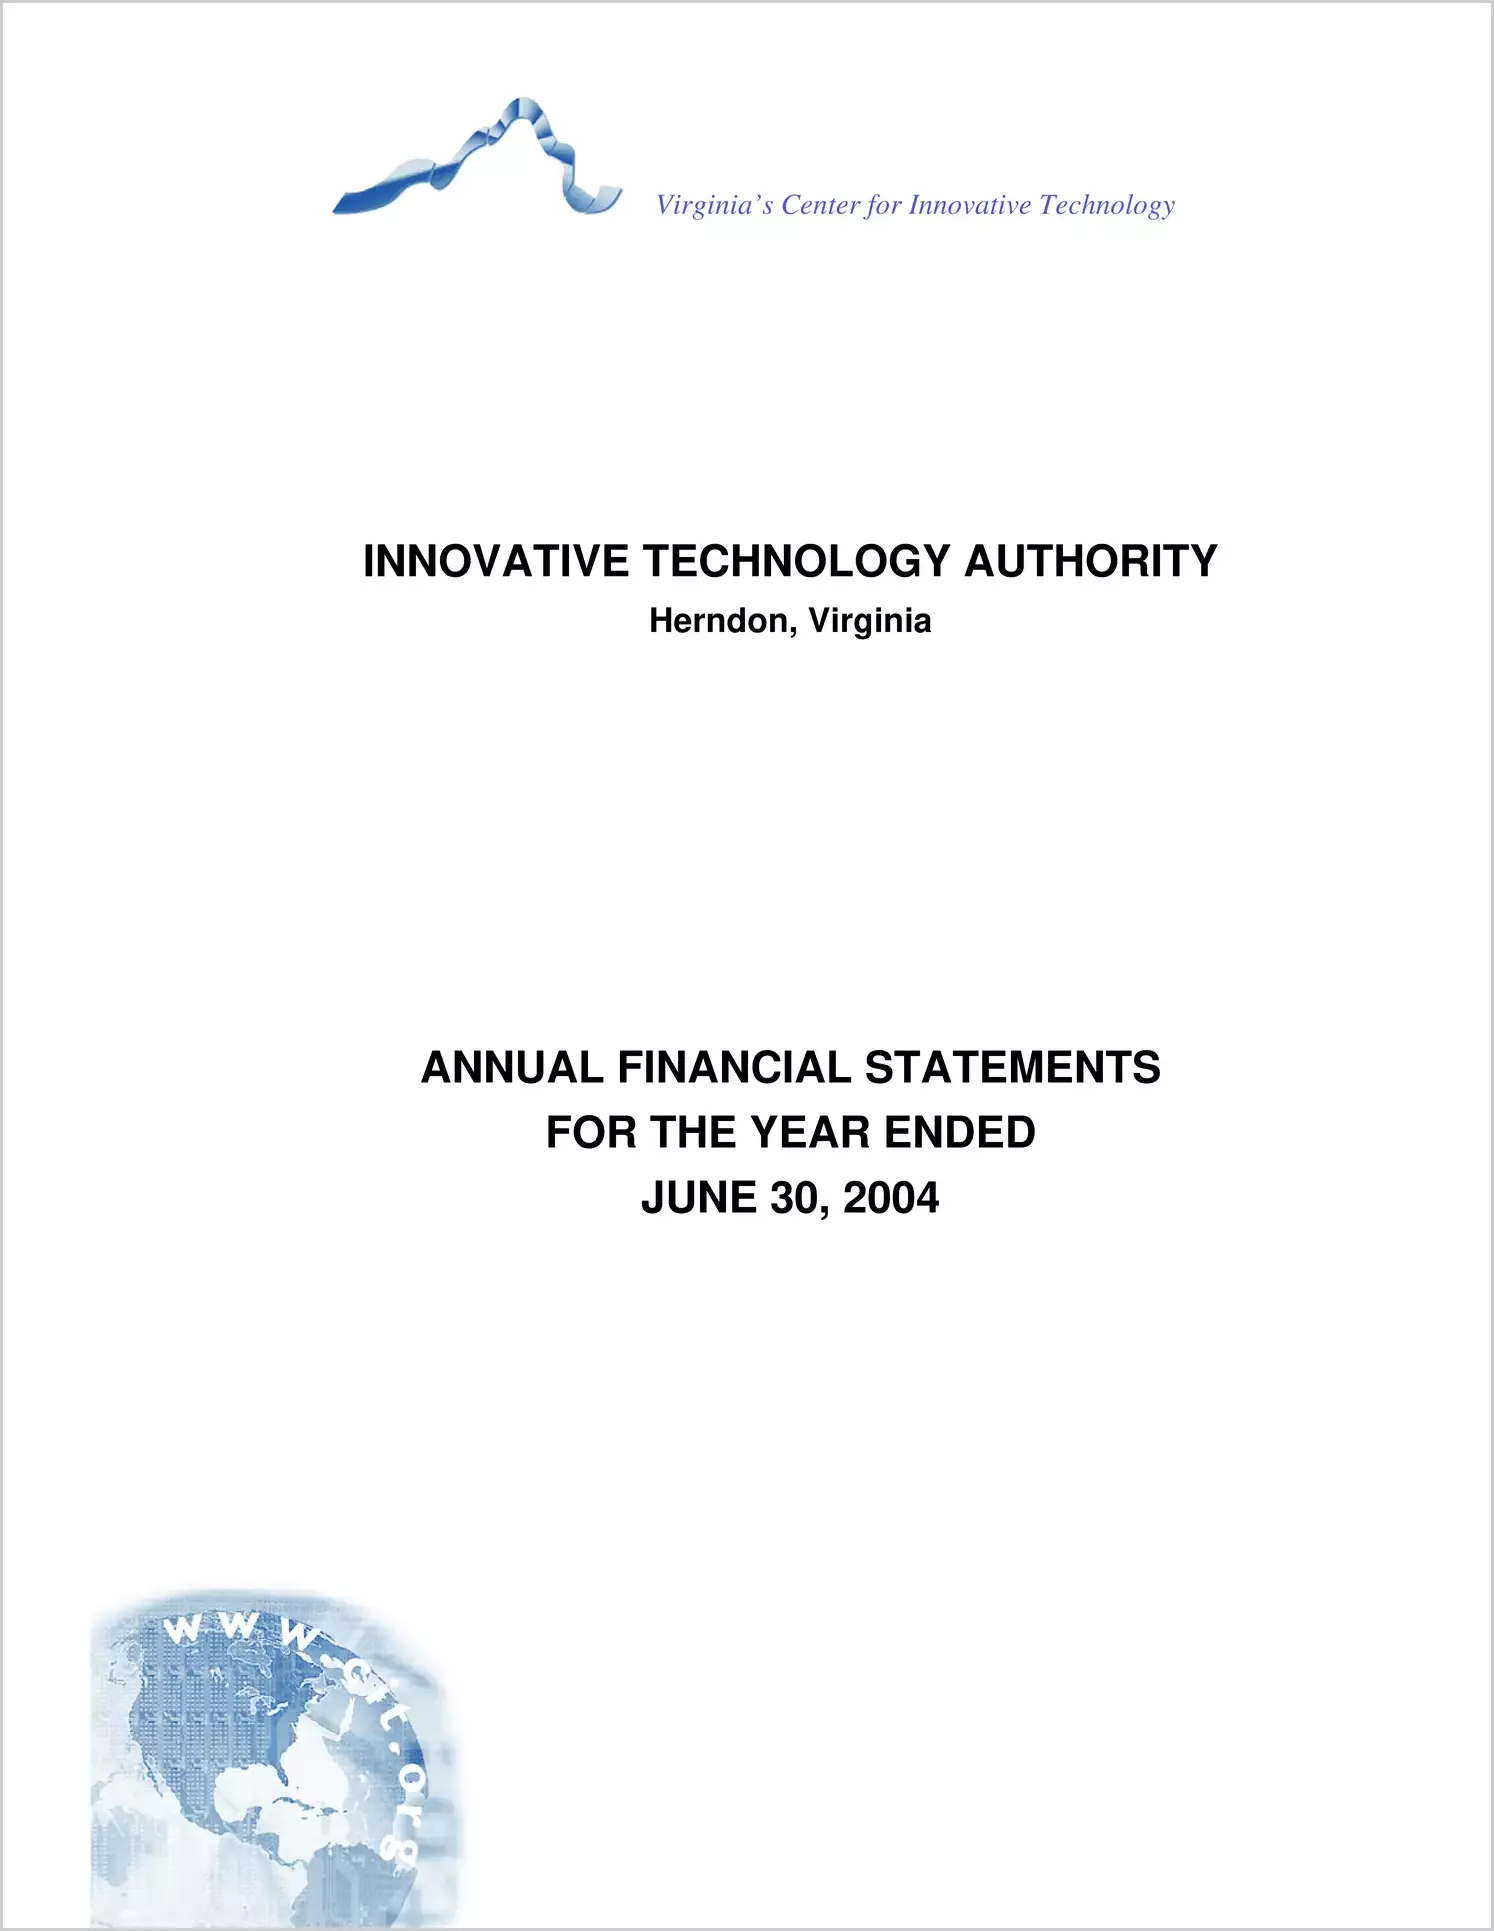 Innovative Technology Authority for the year ended June 30, 2004